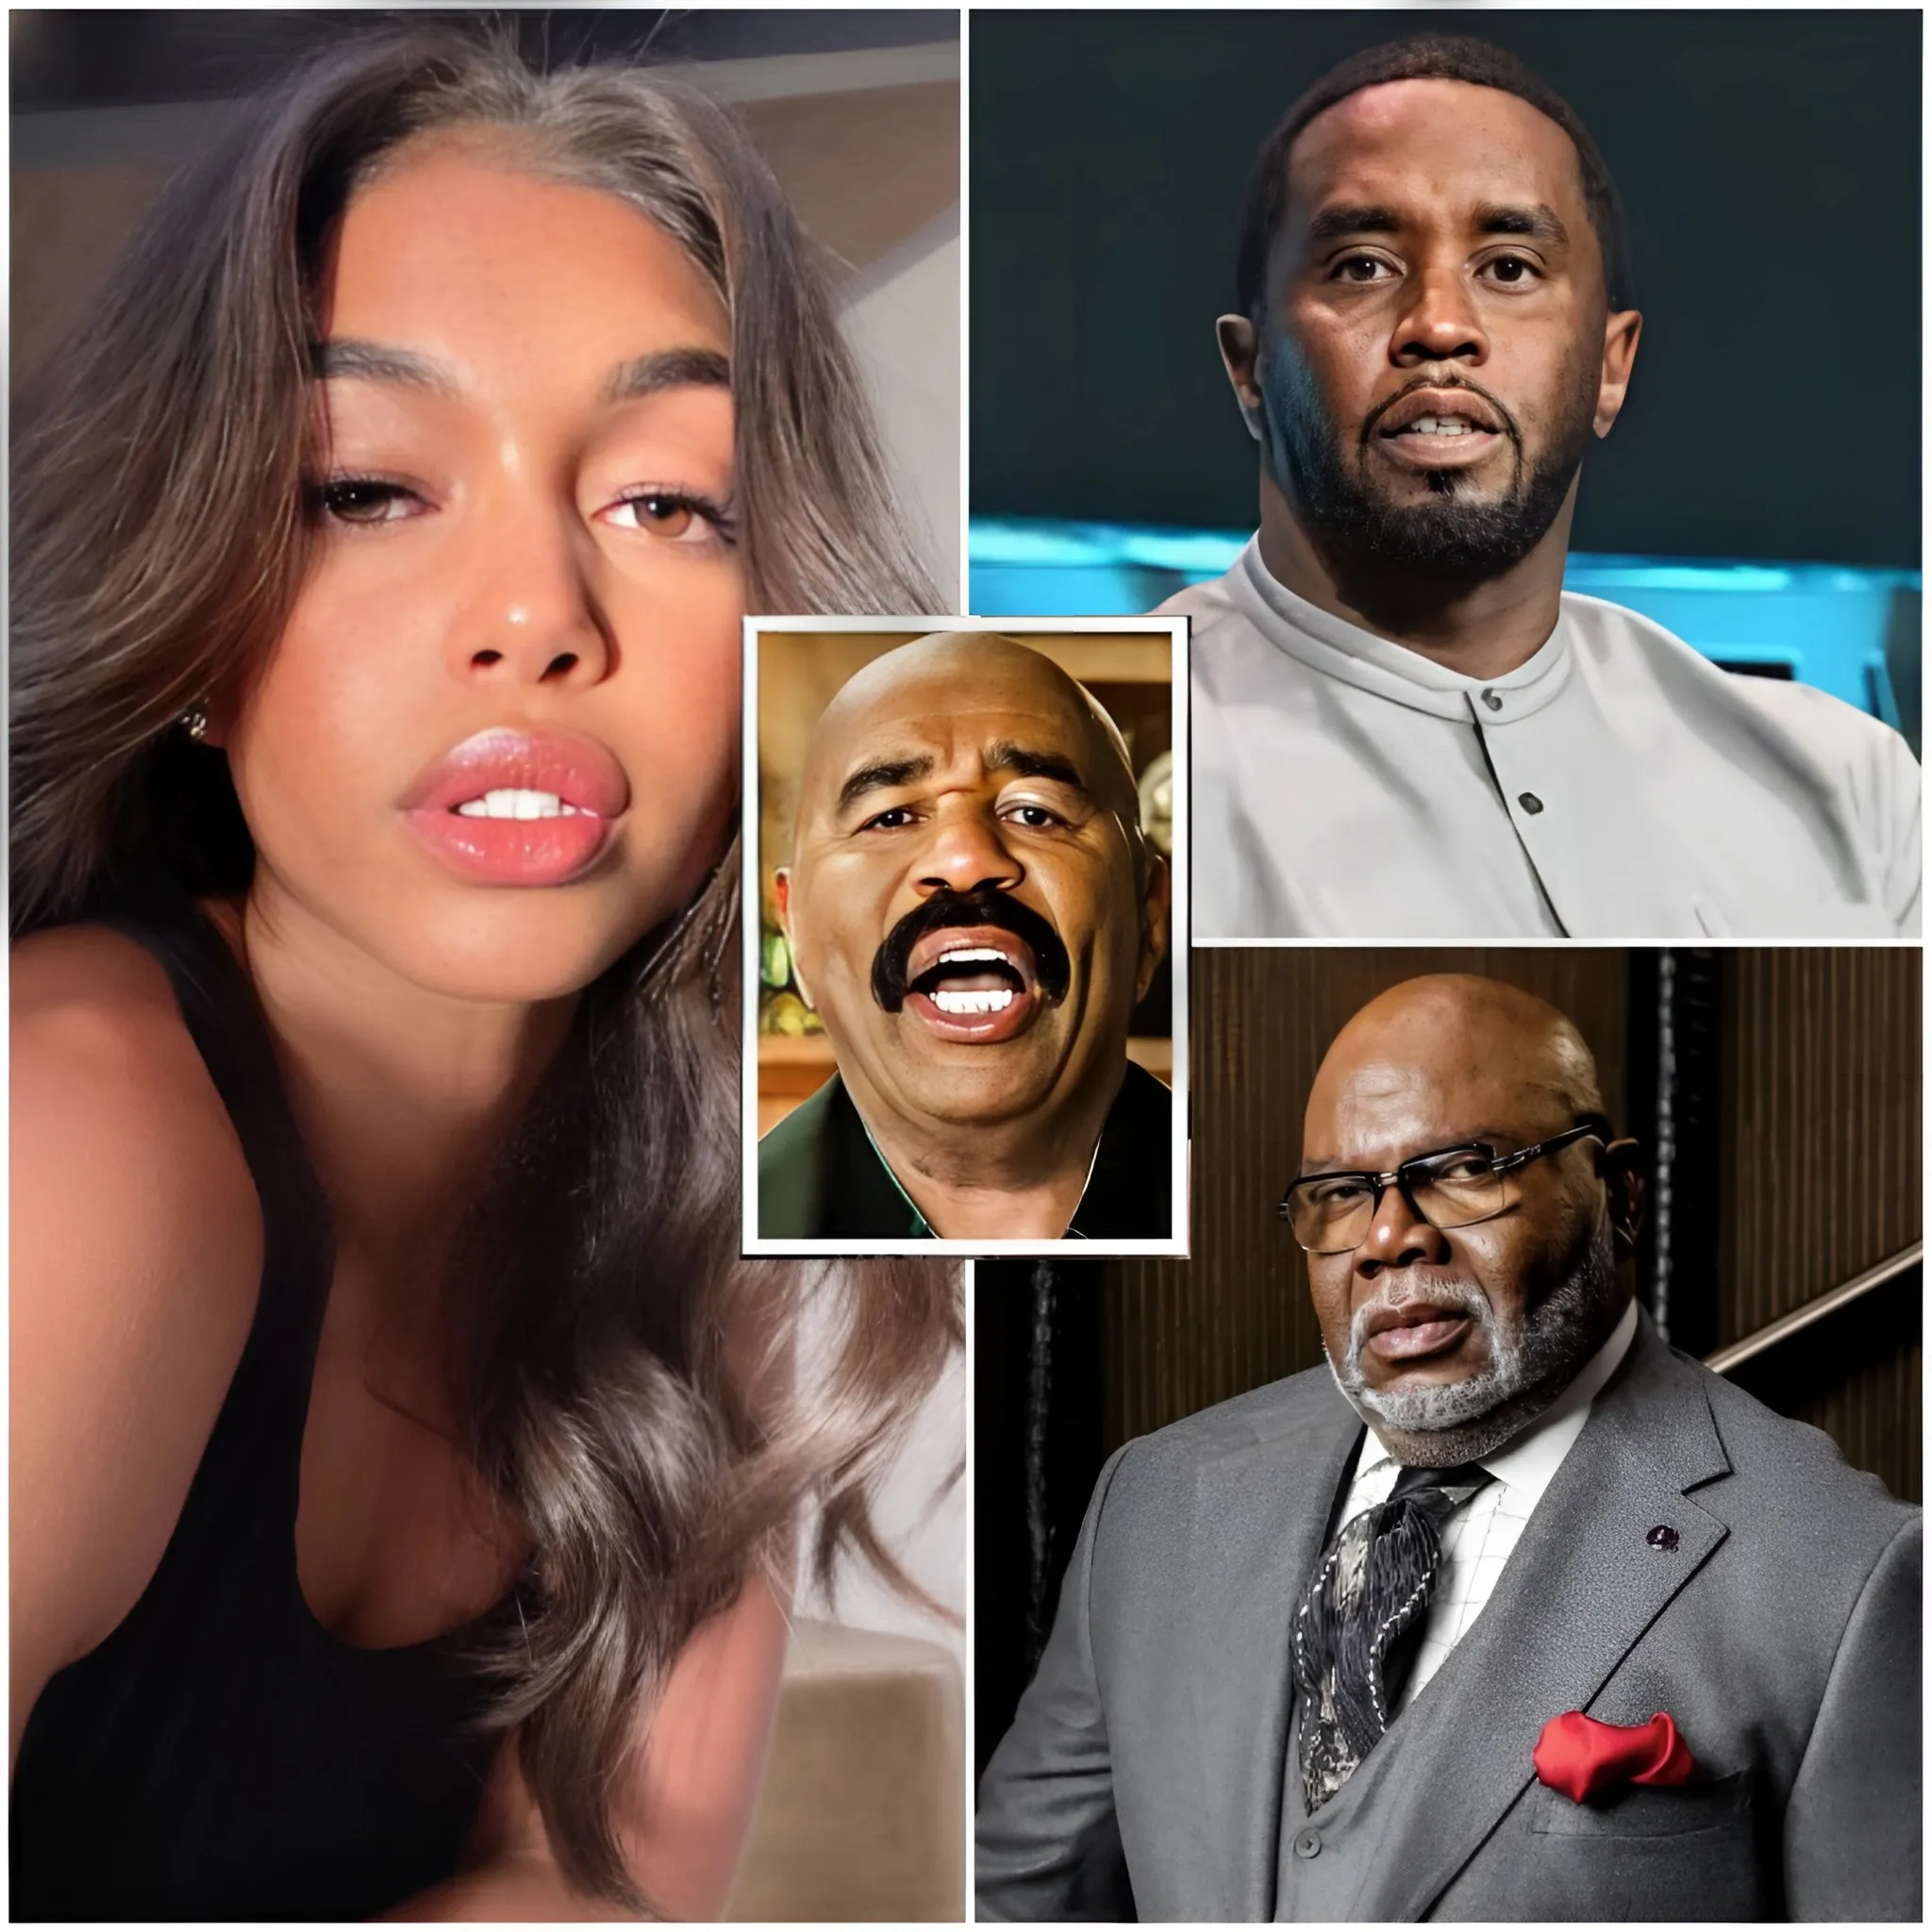 A CHEATING HEART! Lori Harvey OFFICIALLY ENDED Steve’s career with party shots that included Diddy and T.D. Jakes!